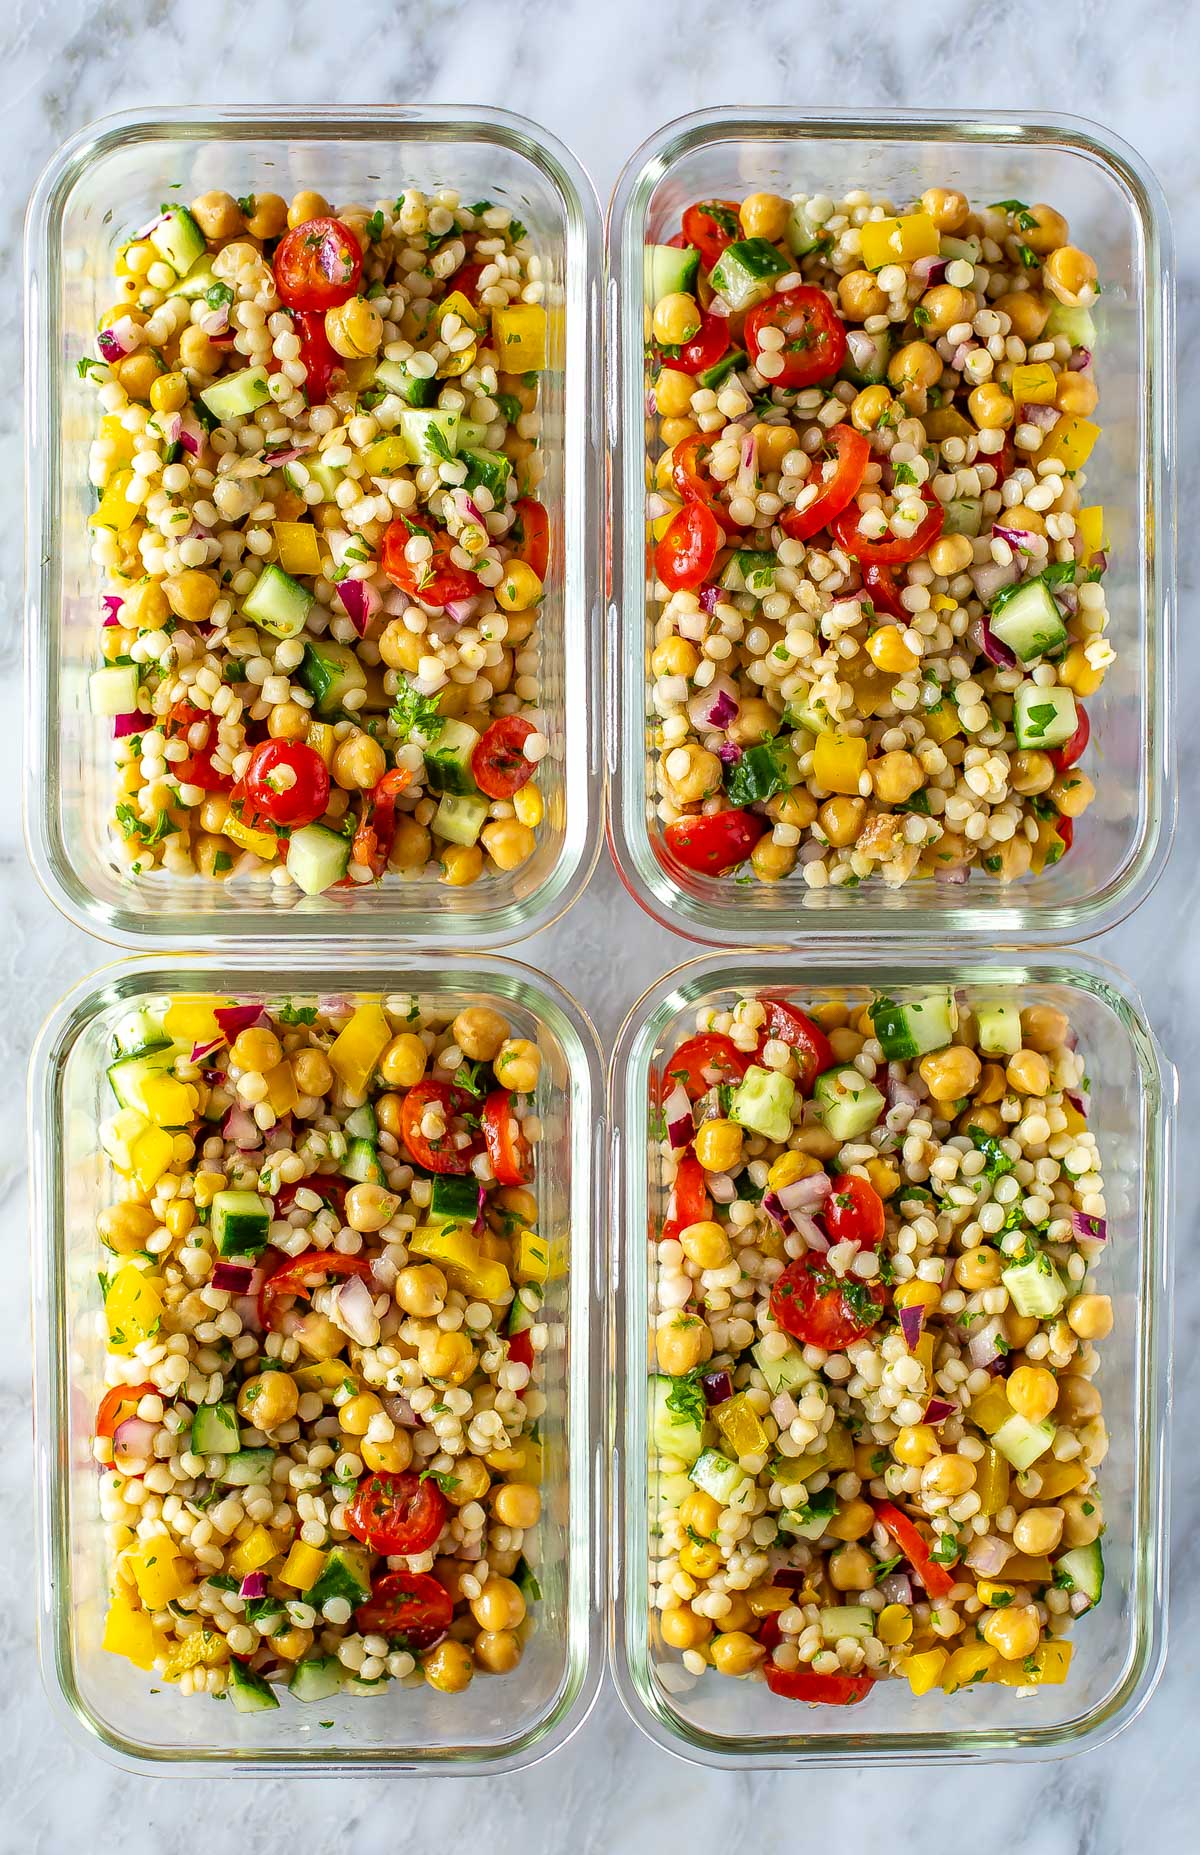 Four meal prep containers, each filled with a serving of Mediterranean couscous salad.